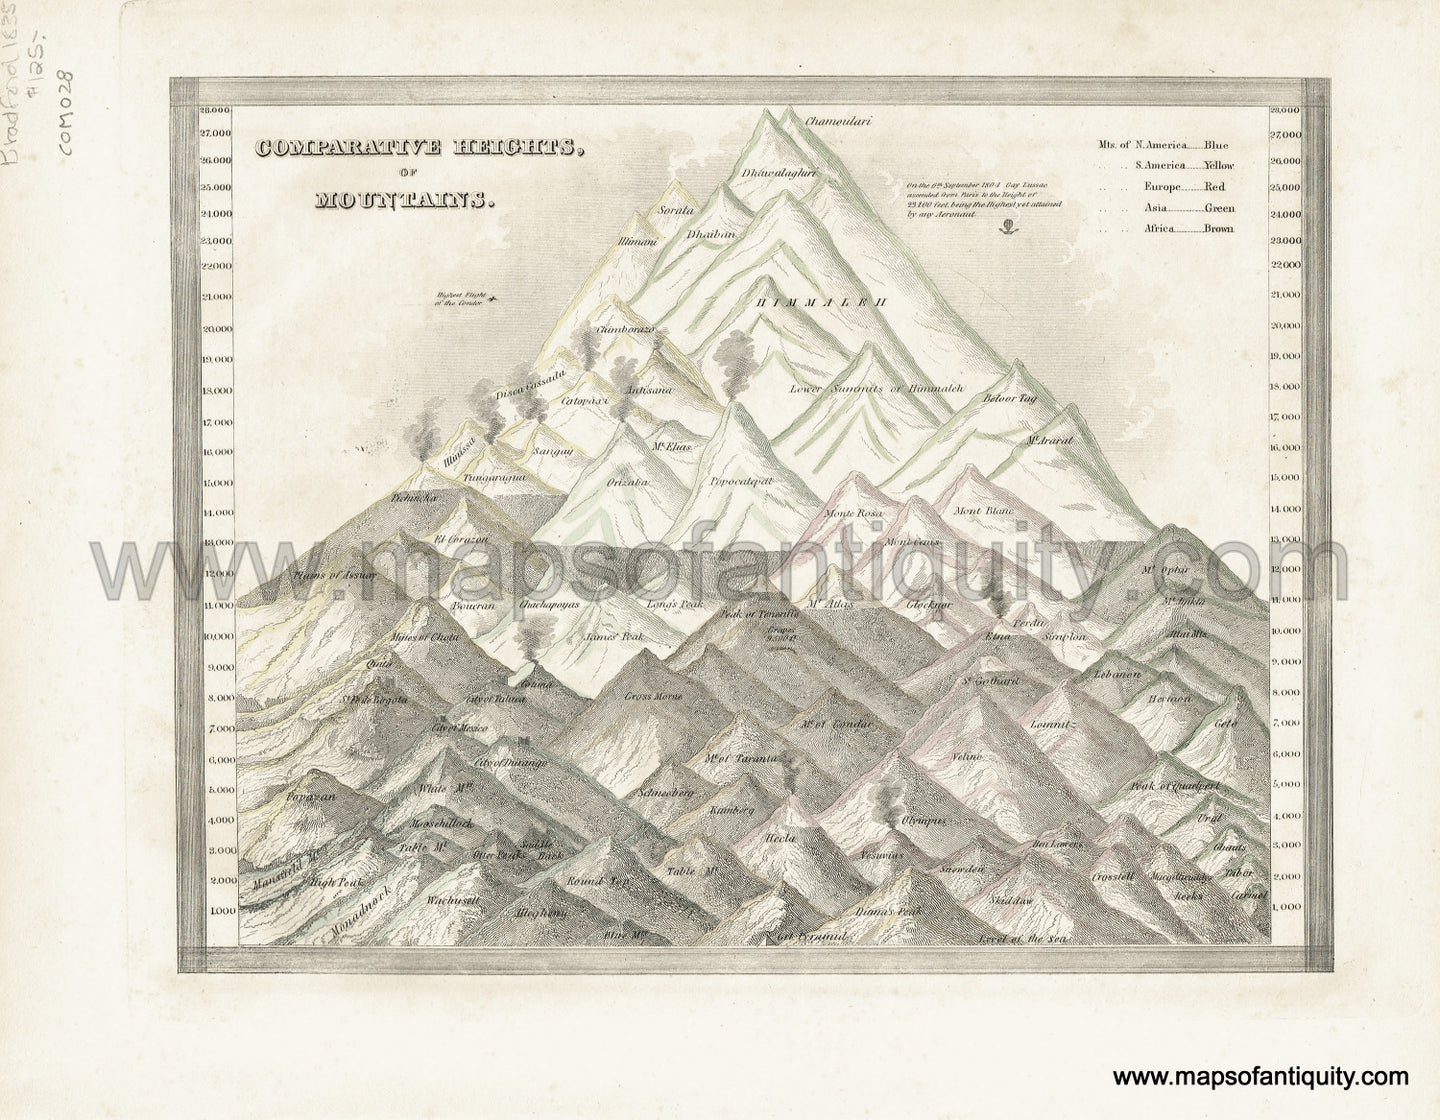 Antique-Hand-Colored-Map-Comparative-Heights-of-Mountains-**********-Comparative-Maps--1835-T.G.-Bradford-Maps-Of-Antiquity